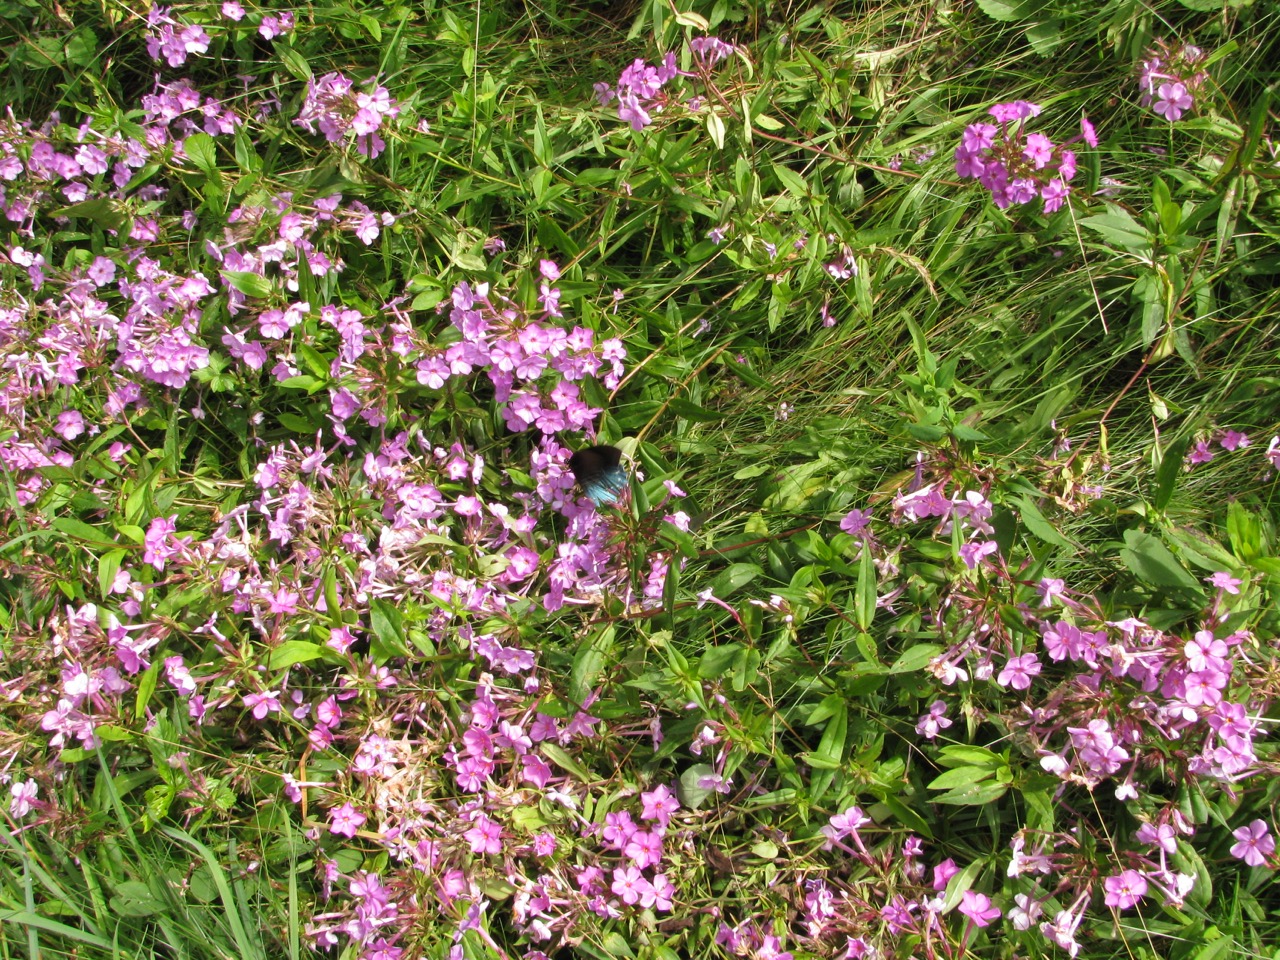 The Scientific Name is Phlox carolina. You will likely hear them called Carolina Phlox, Thick-leaf Phlox, Giant Phlox, Summer Phlox. This picture shows the In full bloom in July of Phlox carolina